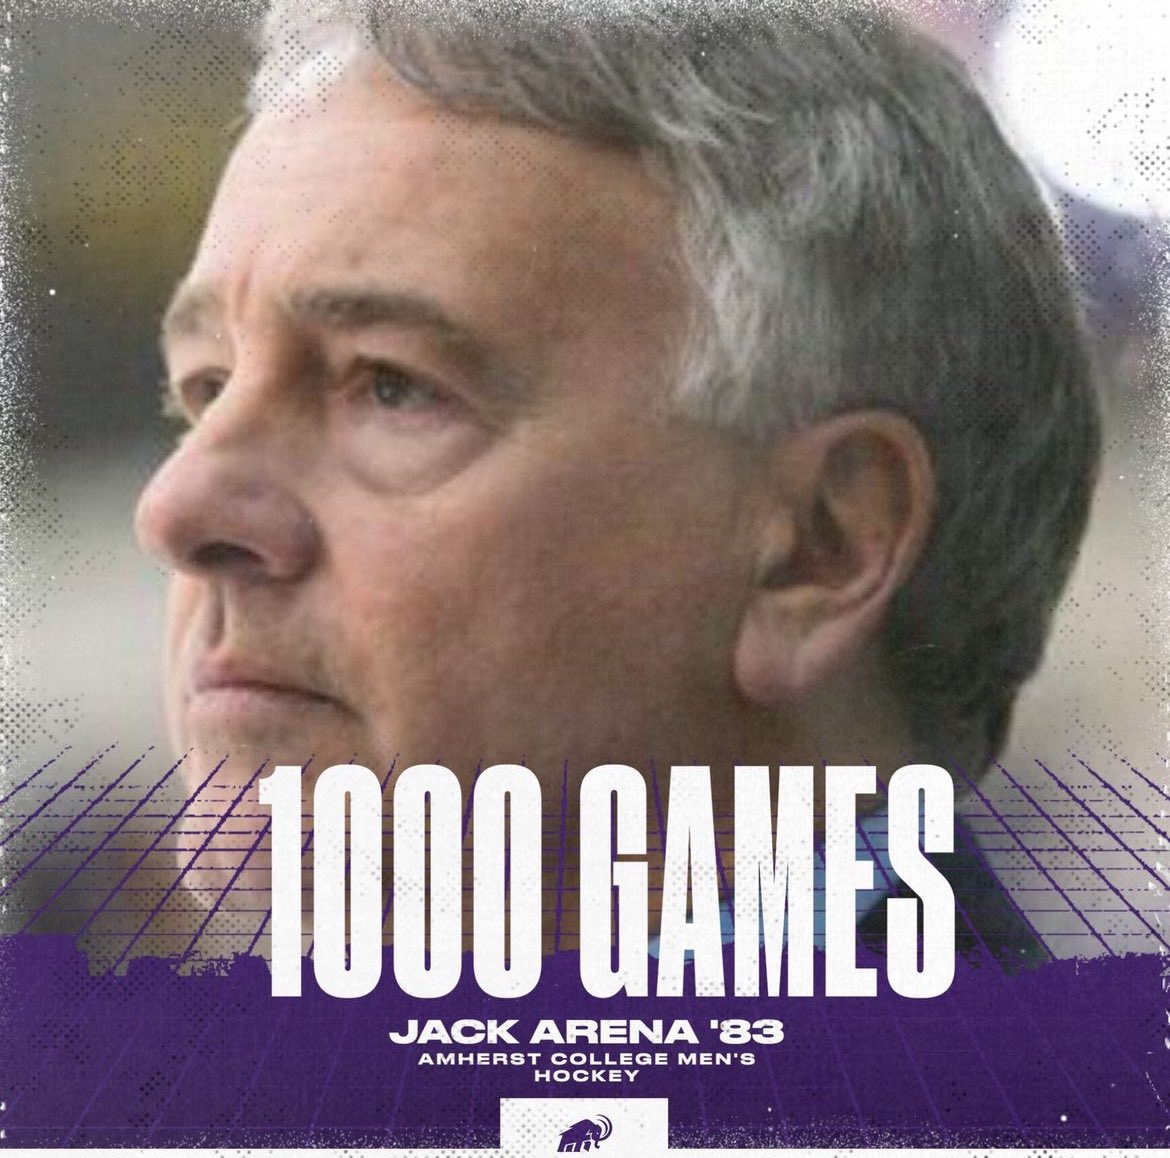 Ahead of tomorrow's NESCAC Quarterfinal, we wanted to take a moment to recognize that tomorrow's game will be Coach Jack Arena's 1000th as Head Coach. Coach Arena has amassed over 500 wins, several NESCAC/ECAC championships, and 2 Frozen Fours. Congratulations Coach! #TusksUp🦣